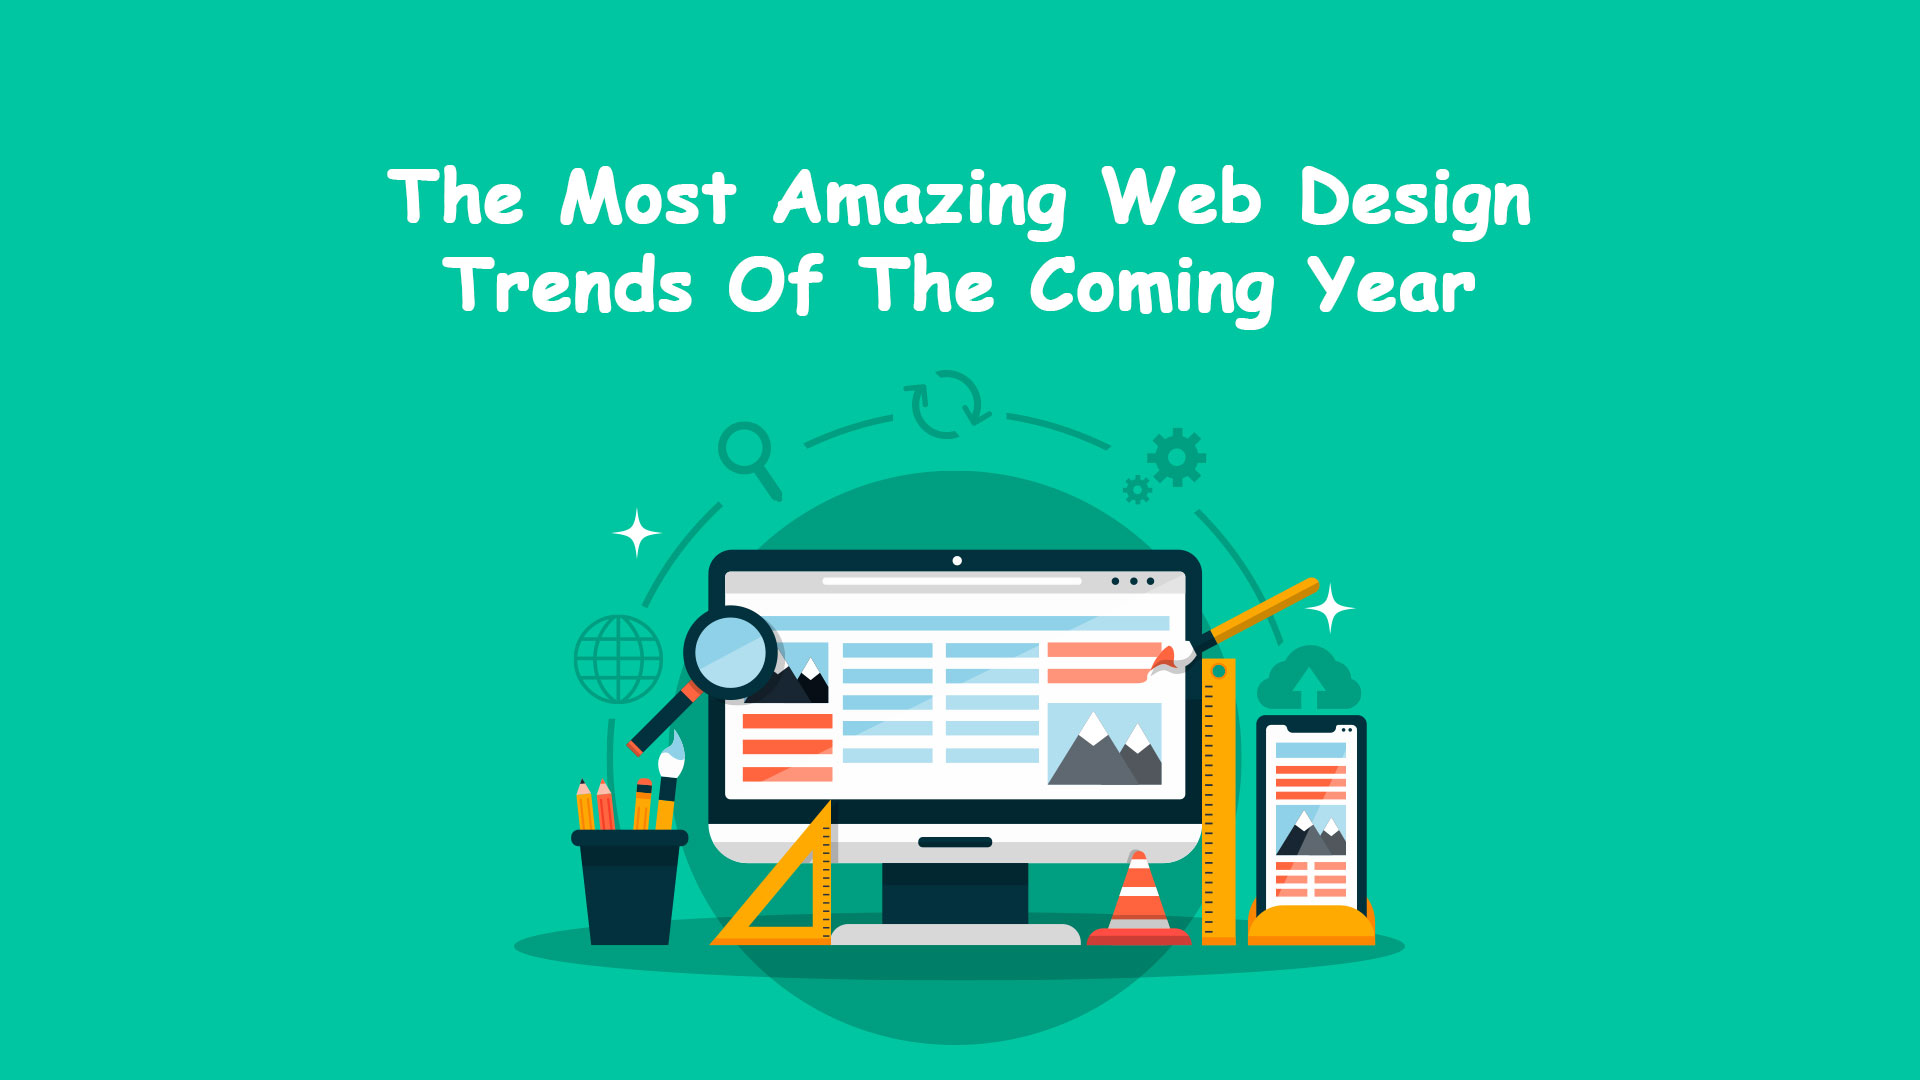 The Most Amazing Web Design Trends of the Coming Year Blog